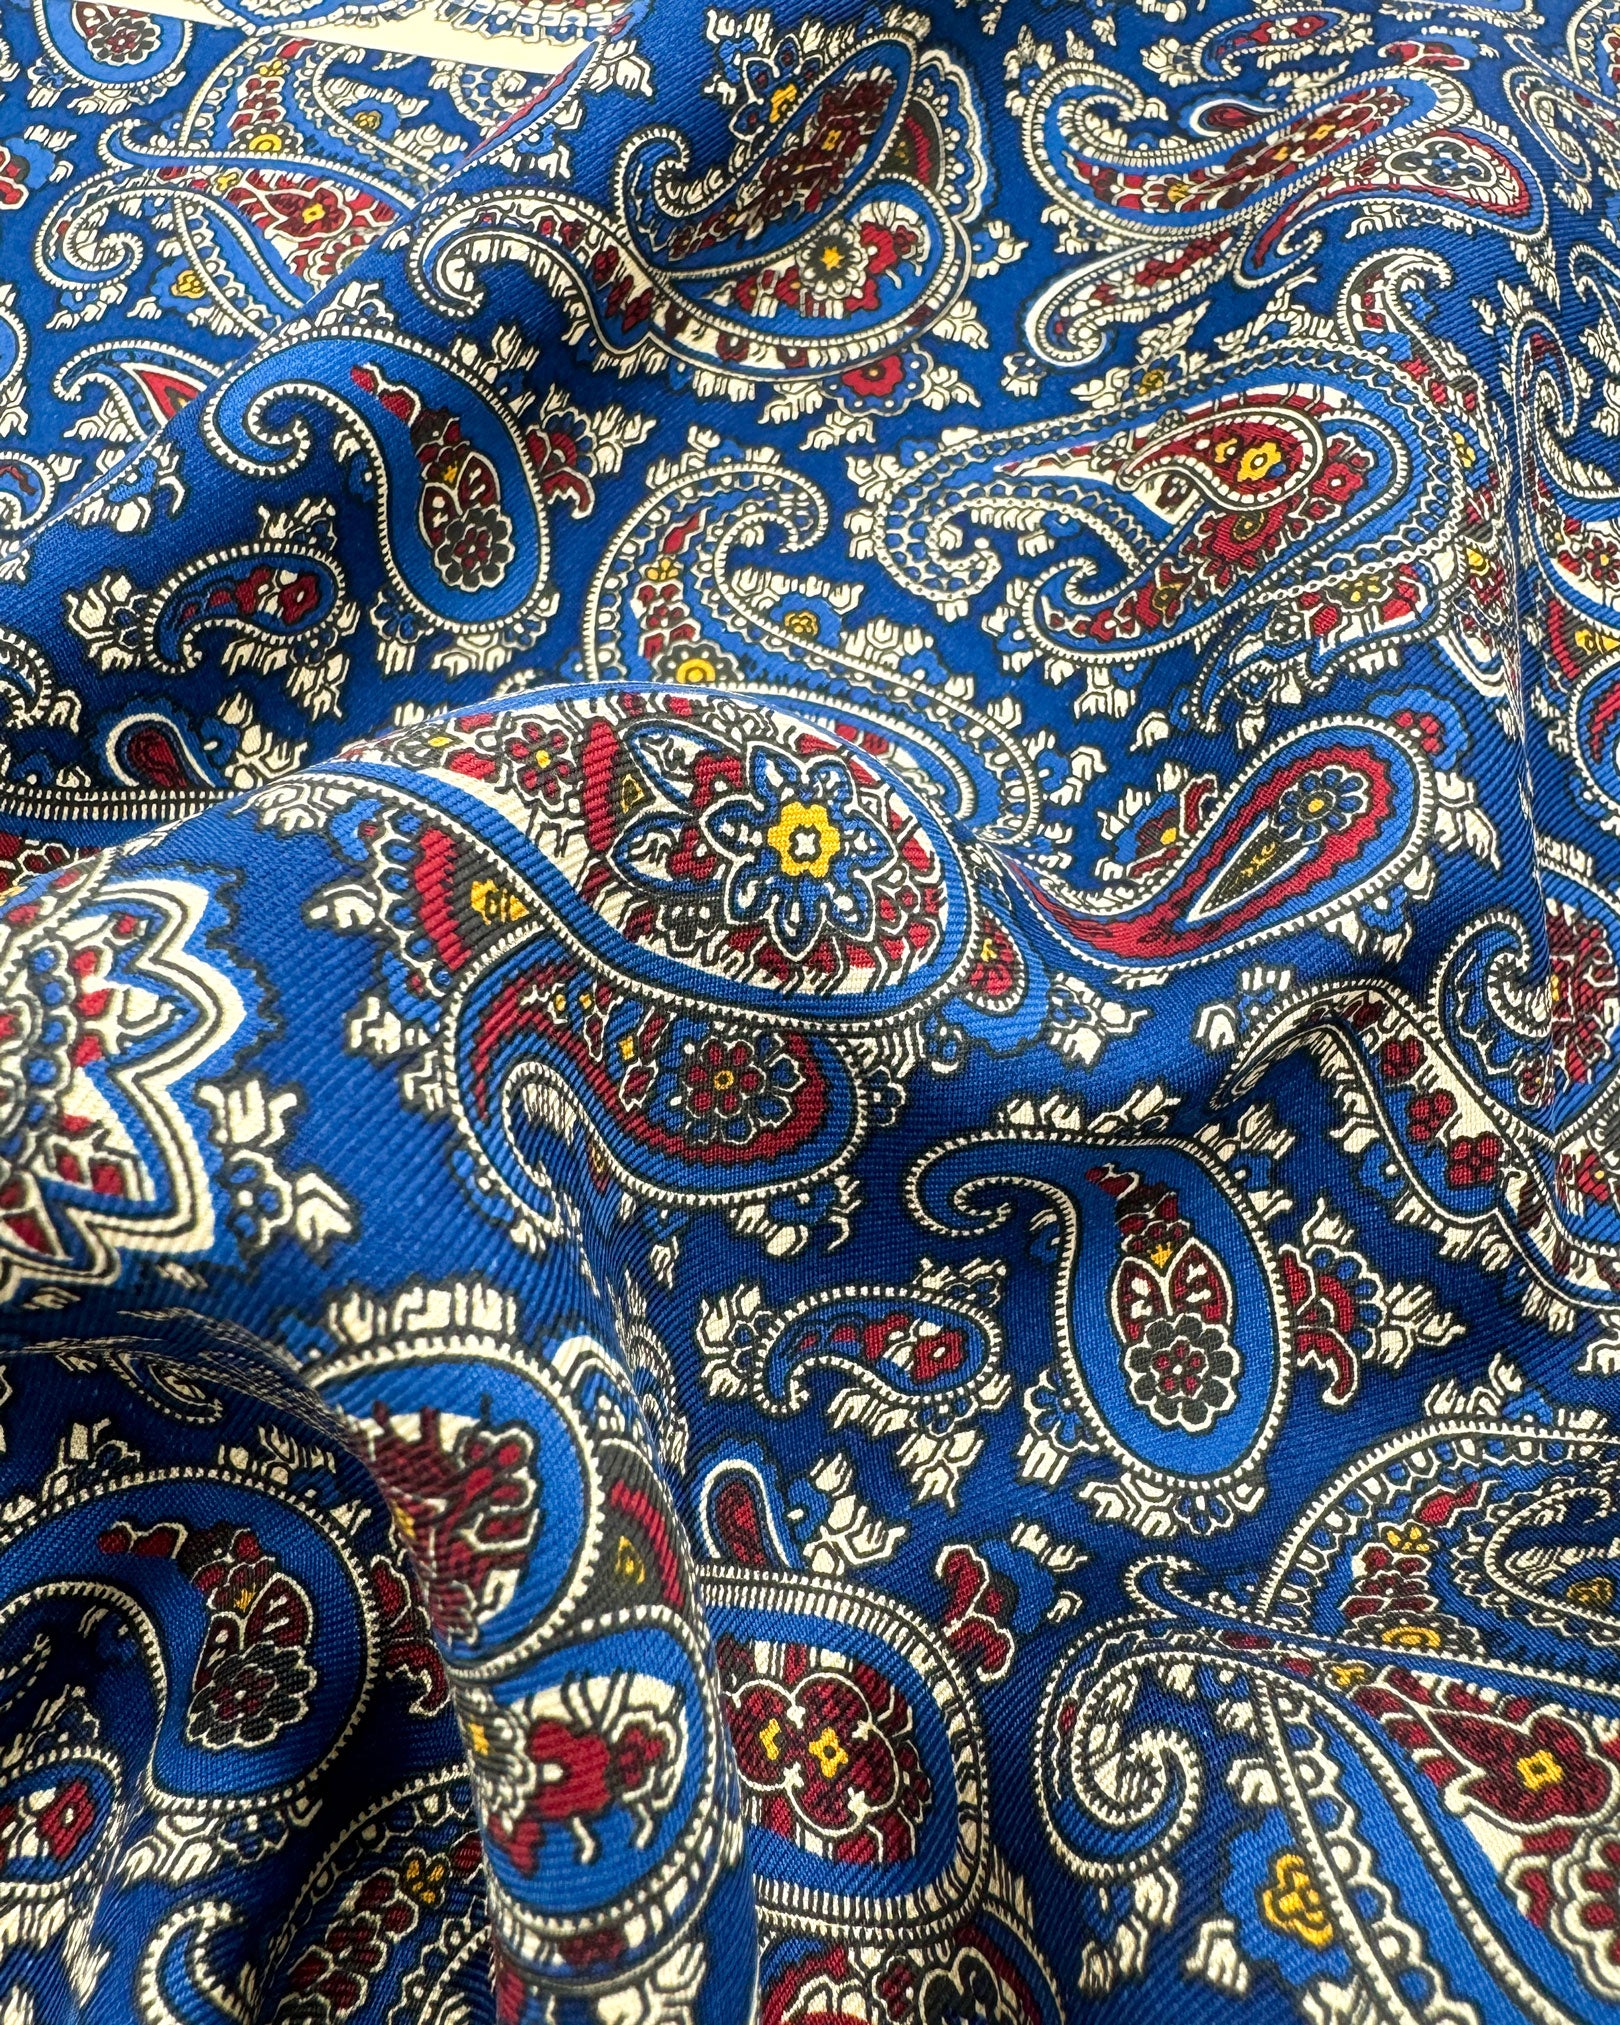 A ruffled close-up of the 'Abbotsbury' pocket square, presenting a closer view of the blue, red and cream paisley patterns against the attractive lustre of the madder silk material. 